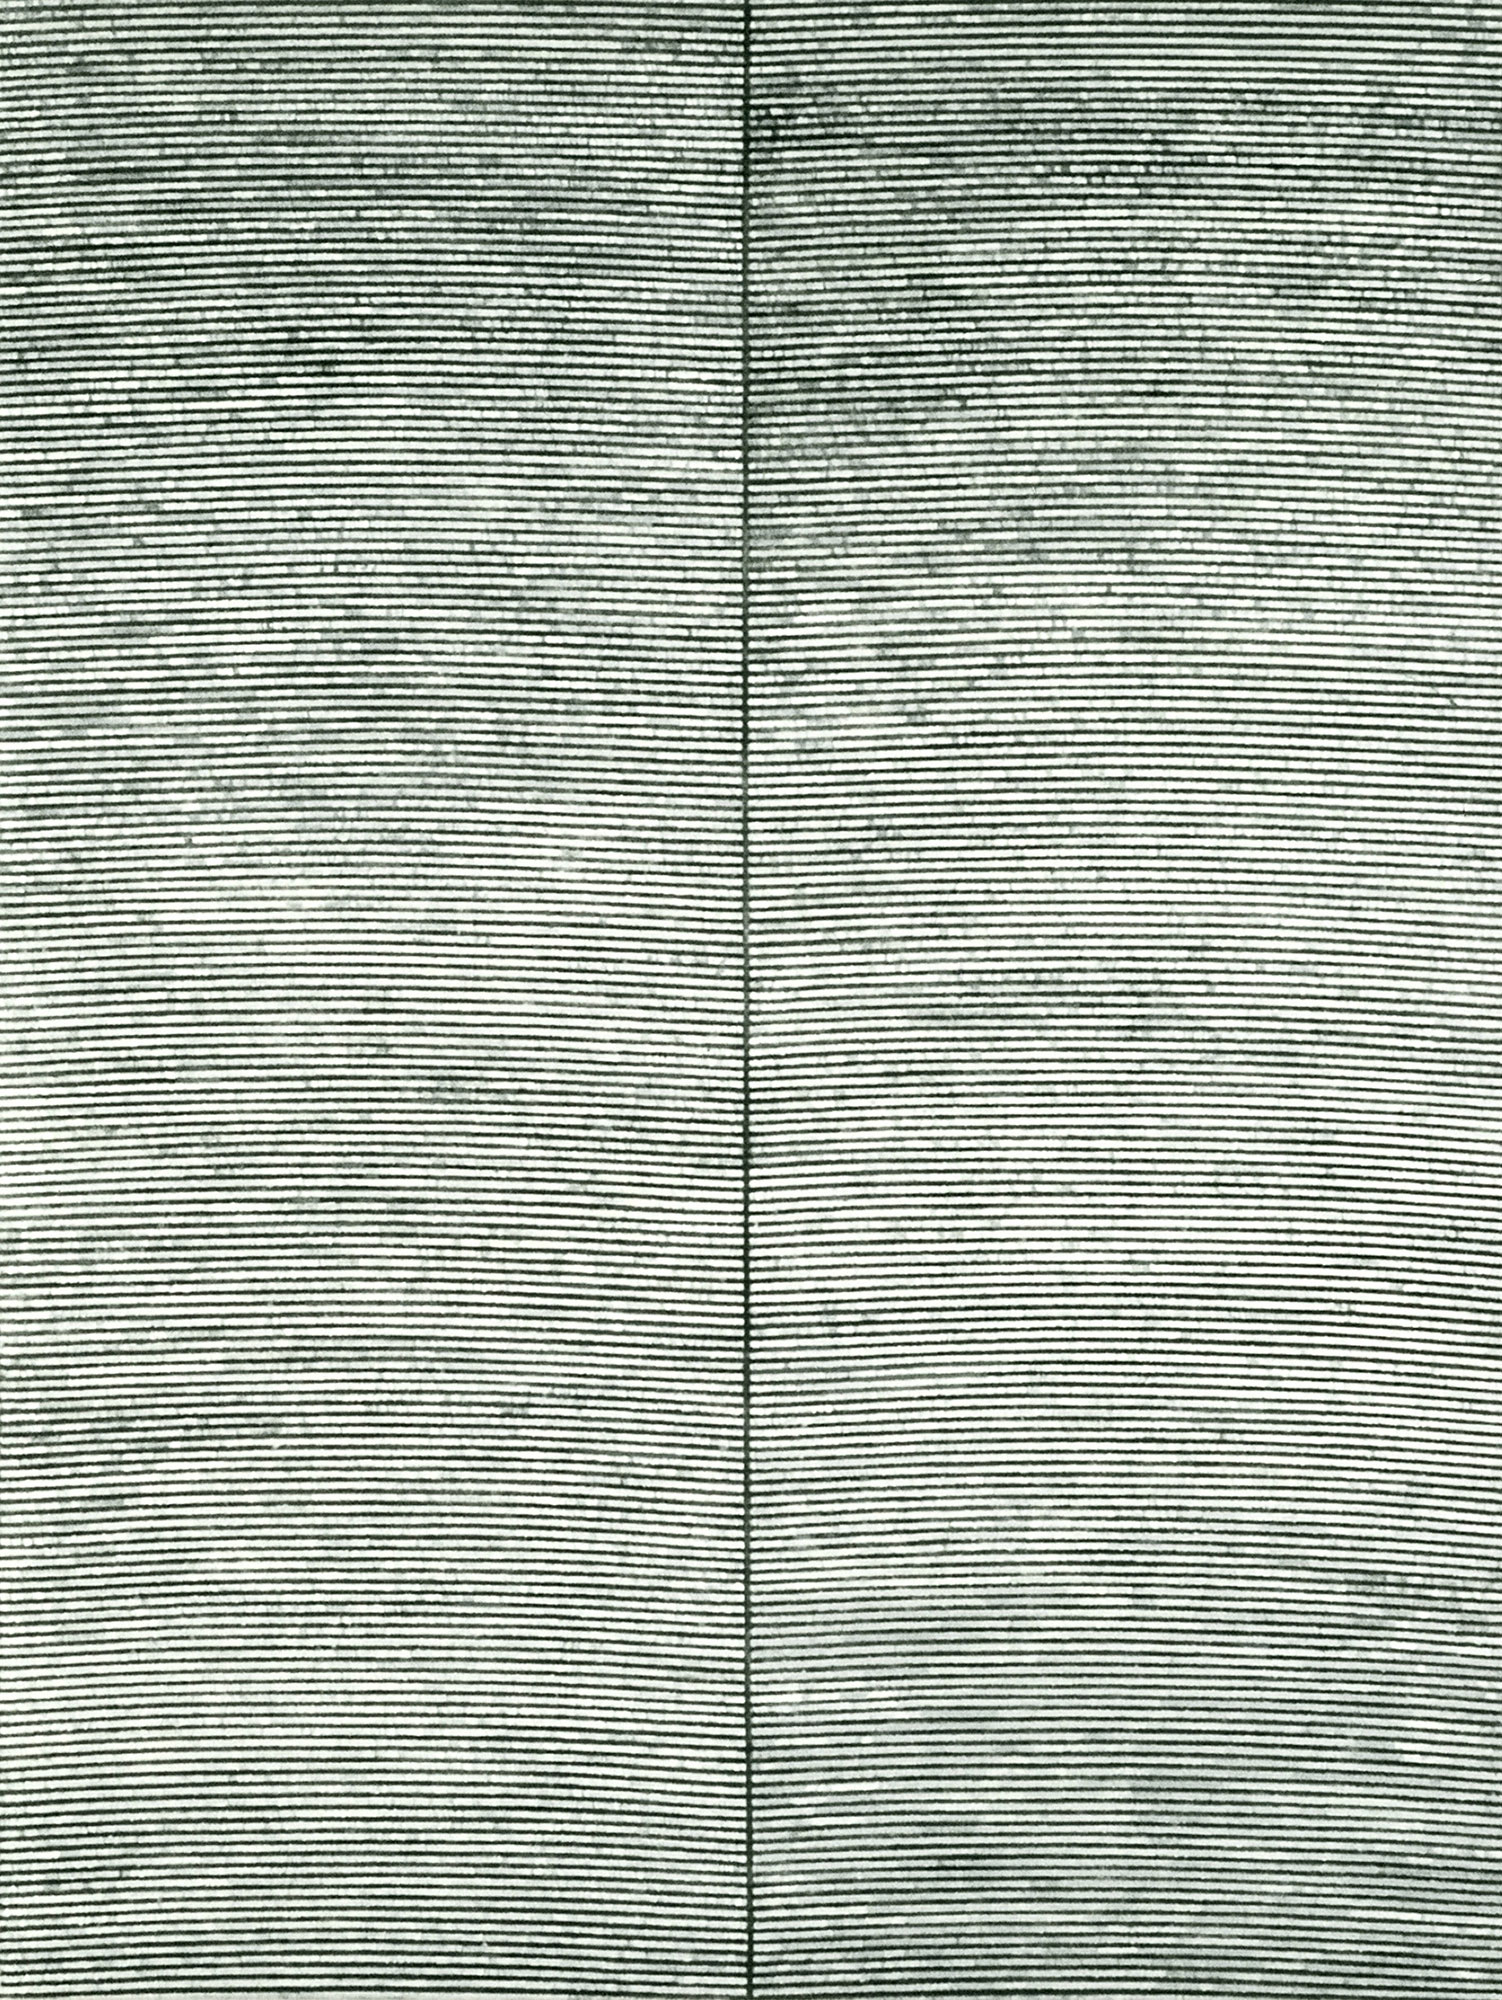 Kenneth Dingwall, Continuing, 1999, oil and graphite on canvas, 214cm x 160cm